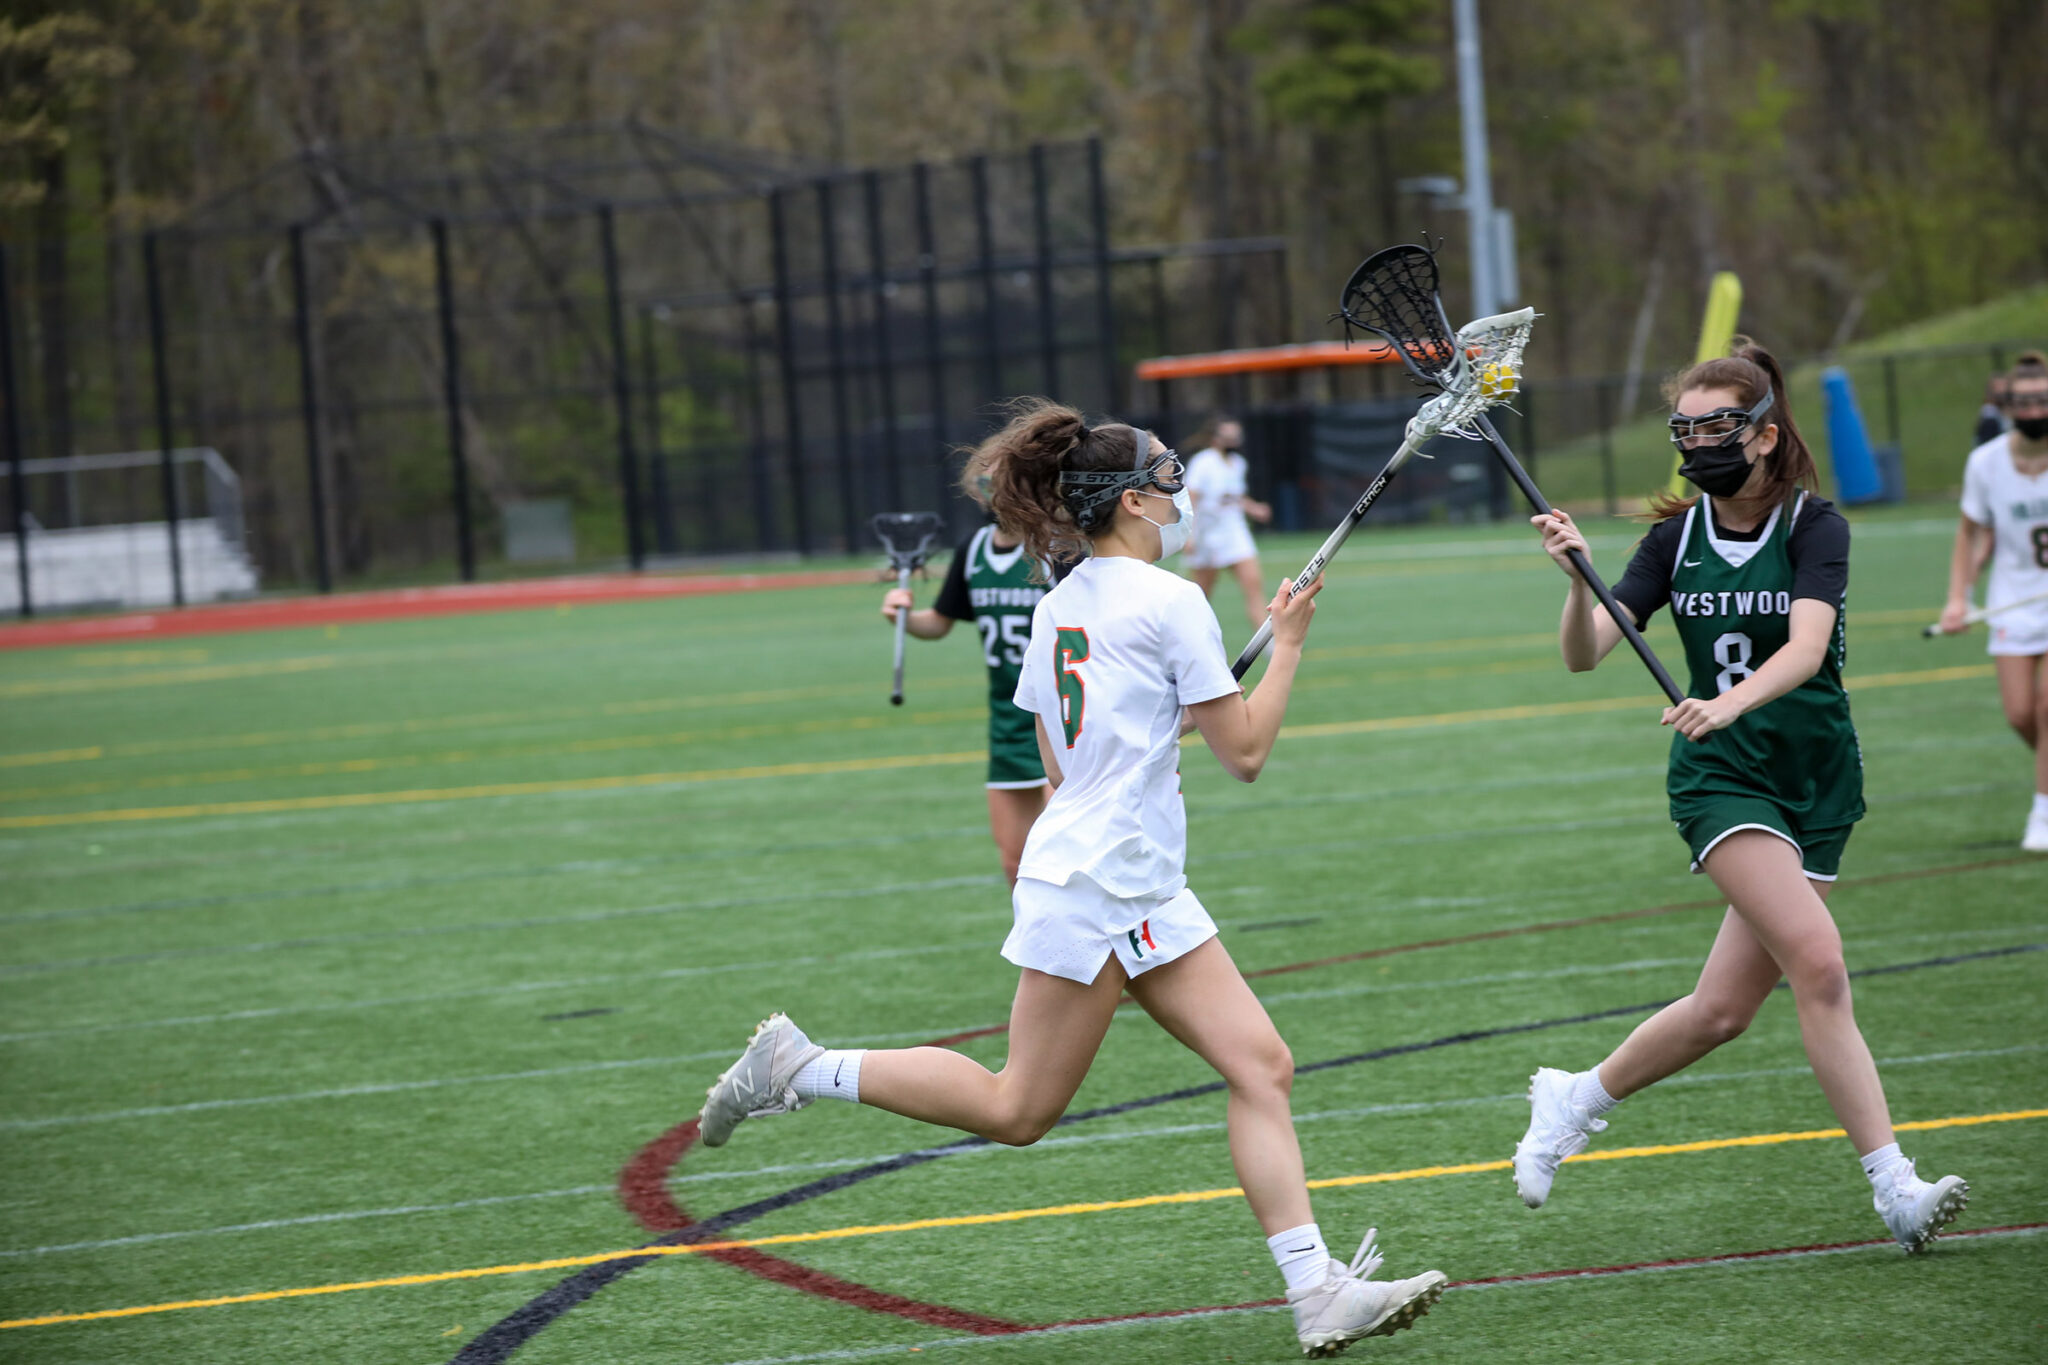 HHS girls lax back after long, emotional offseason